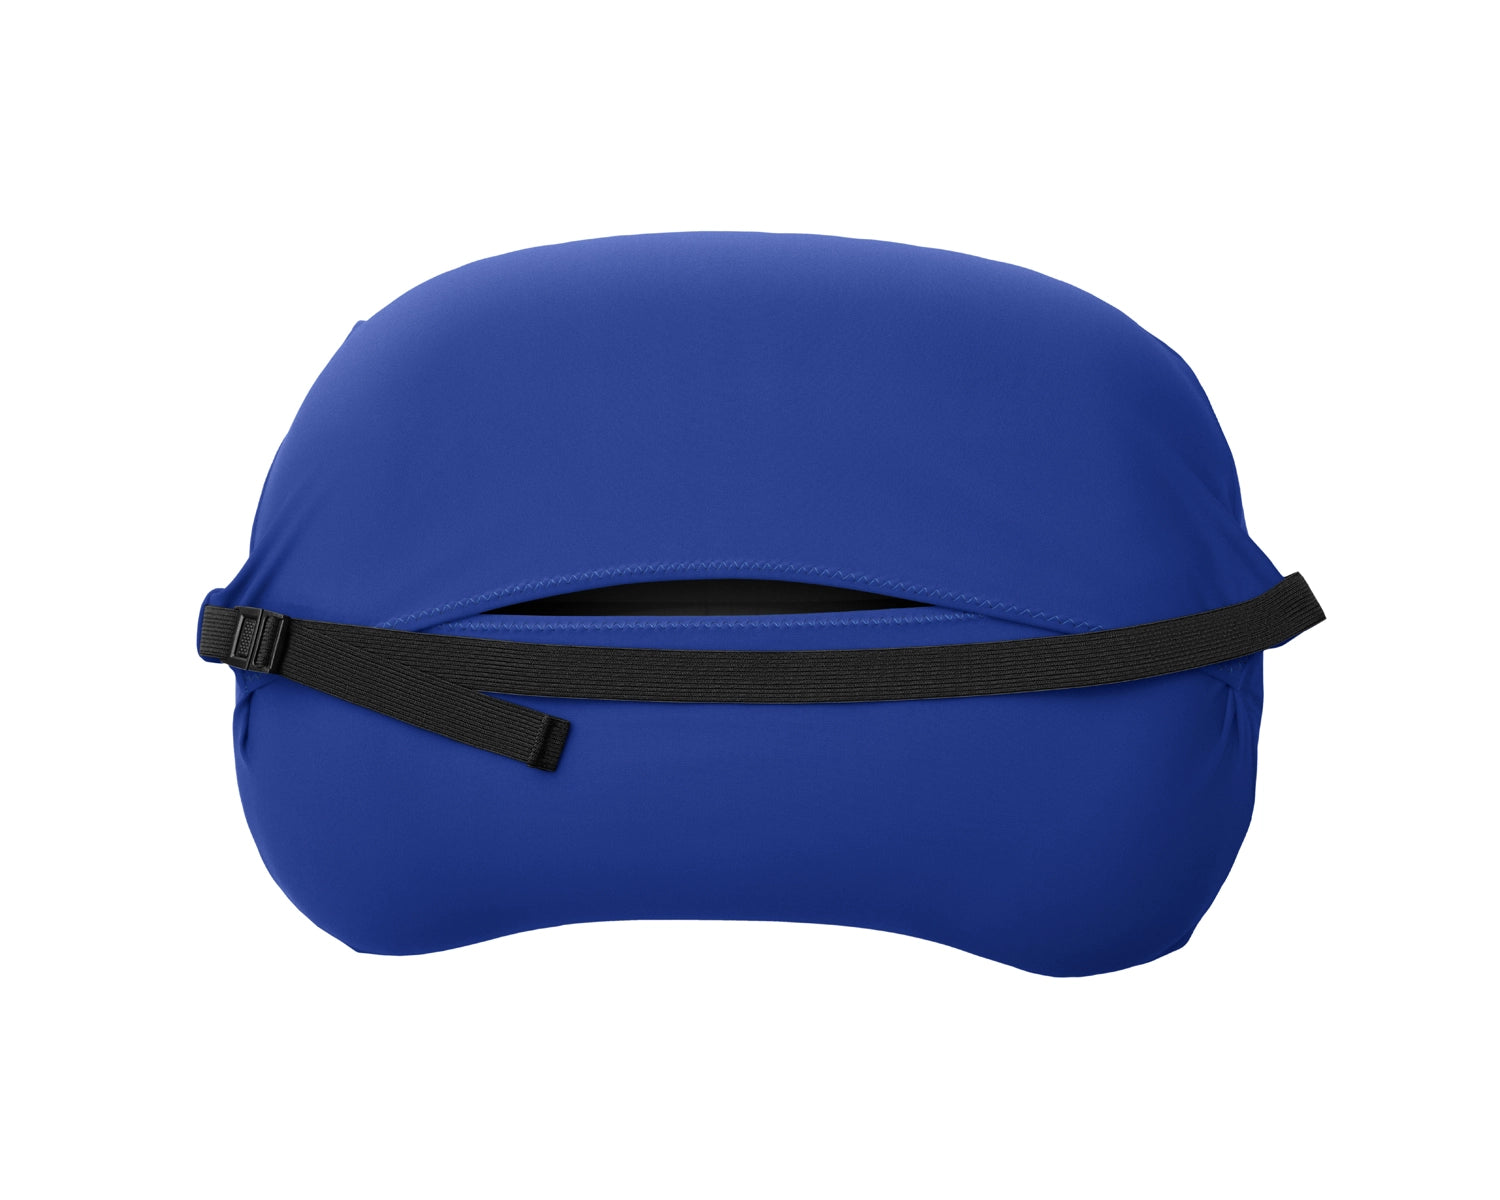 Trifold enclosure and strap of medium in blue Pillow Strap to securely hold camp pillow to sleeping pad.